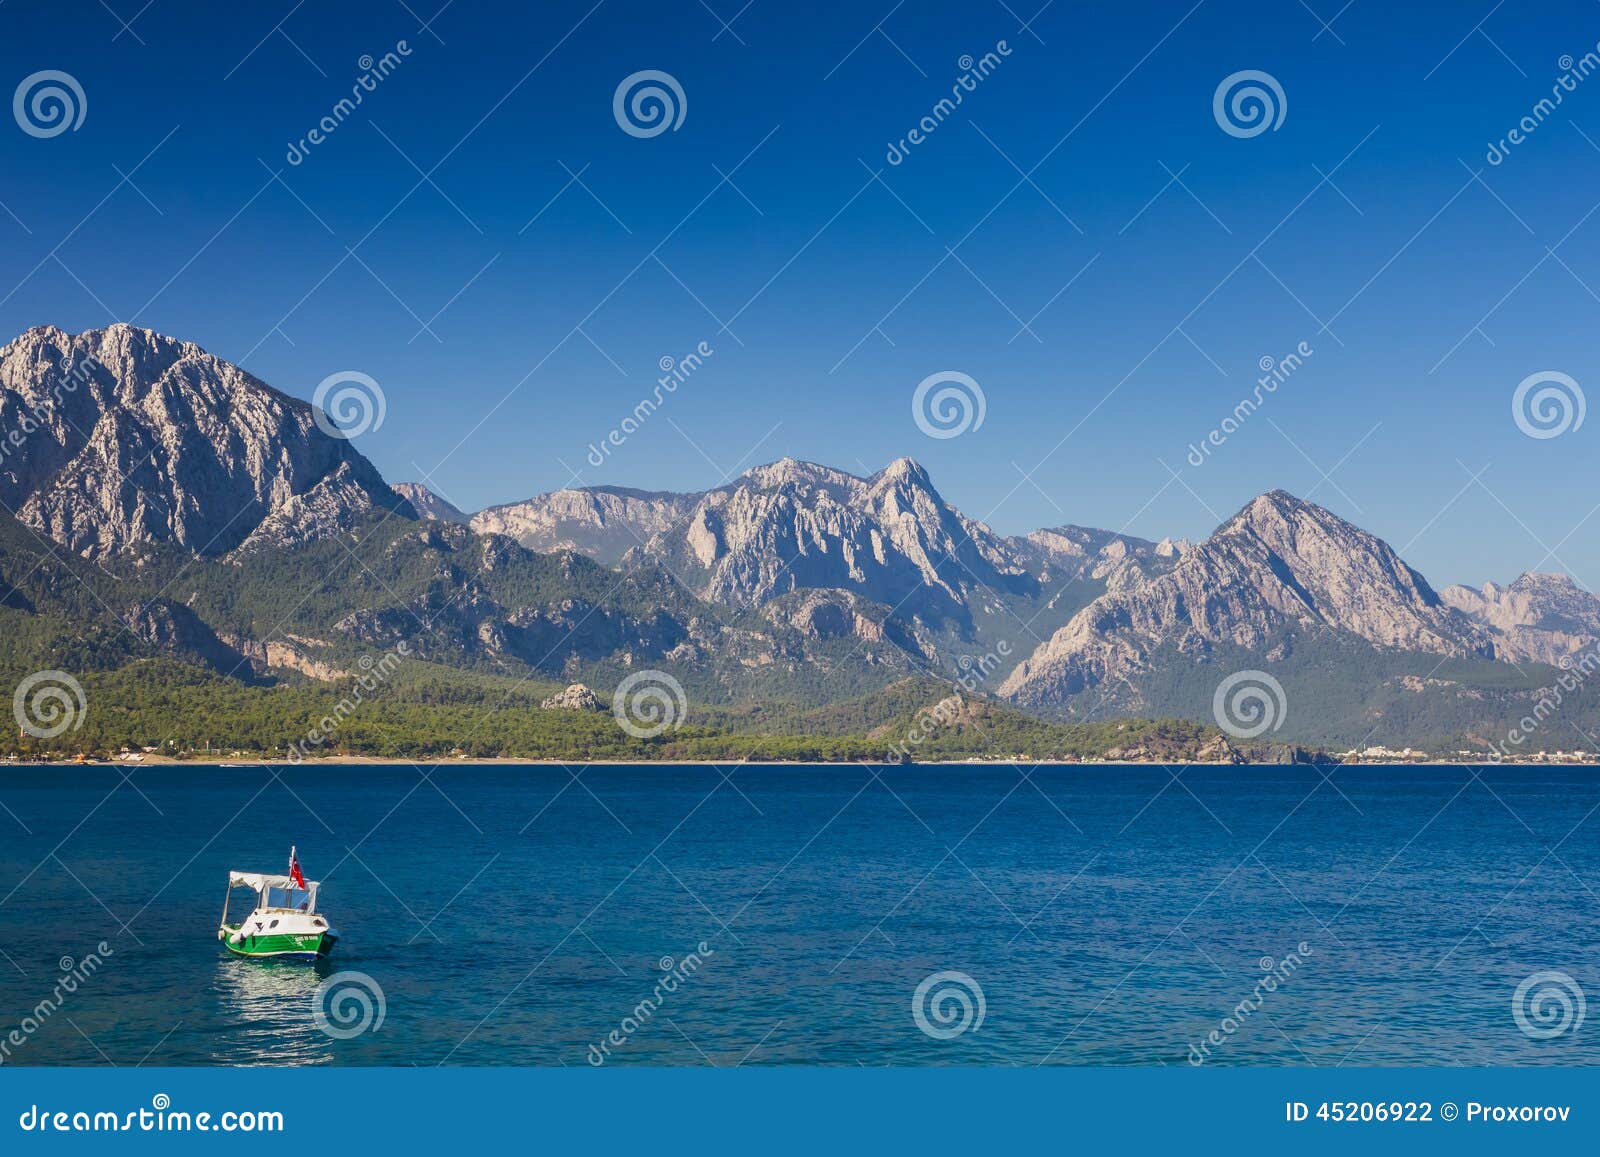 Beautiful View Of Kemer Town And Boat In The Sea Stock Photo - Image ...